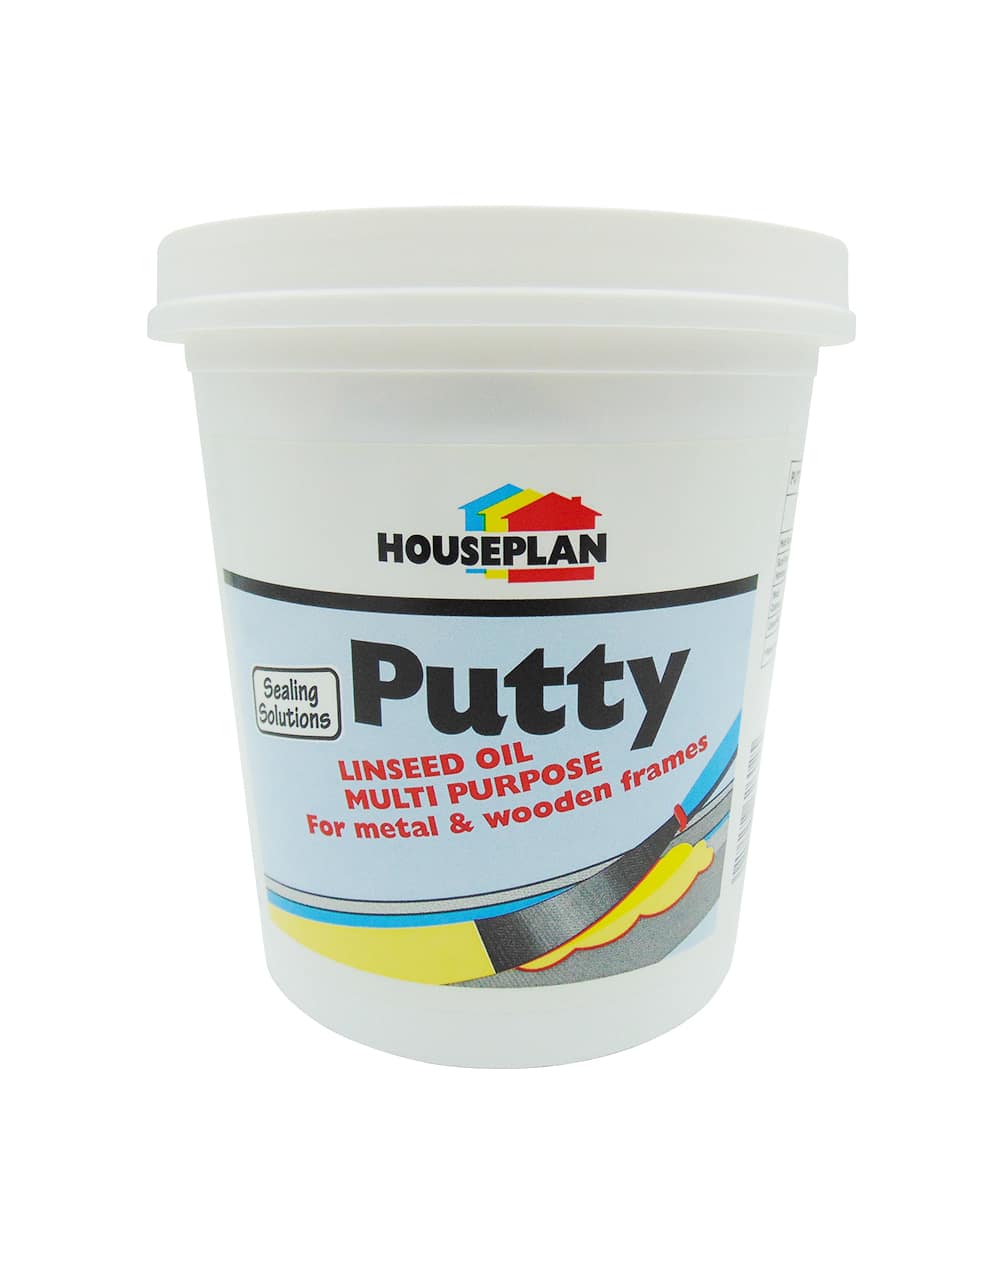 Palace Dual Purpose Putty | Linseed Oil-based Hand Applied Glazing Compound